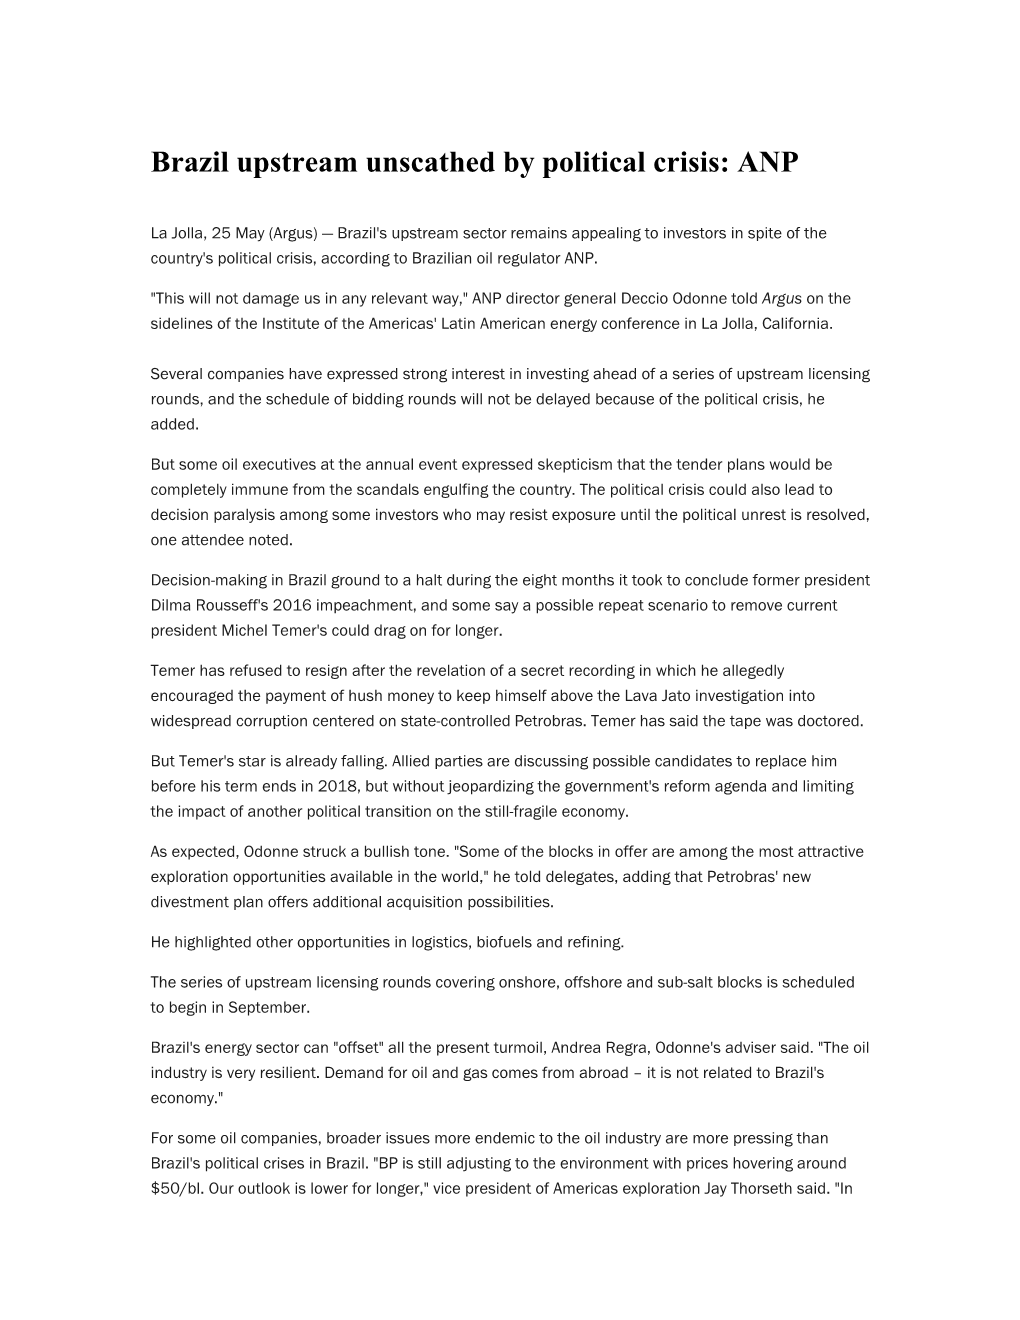 Brazil Upstream Unscathed by Political Crisis: ANP